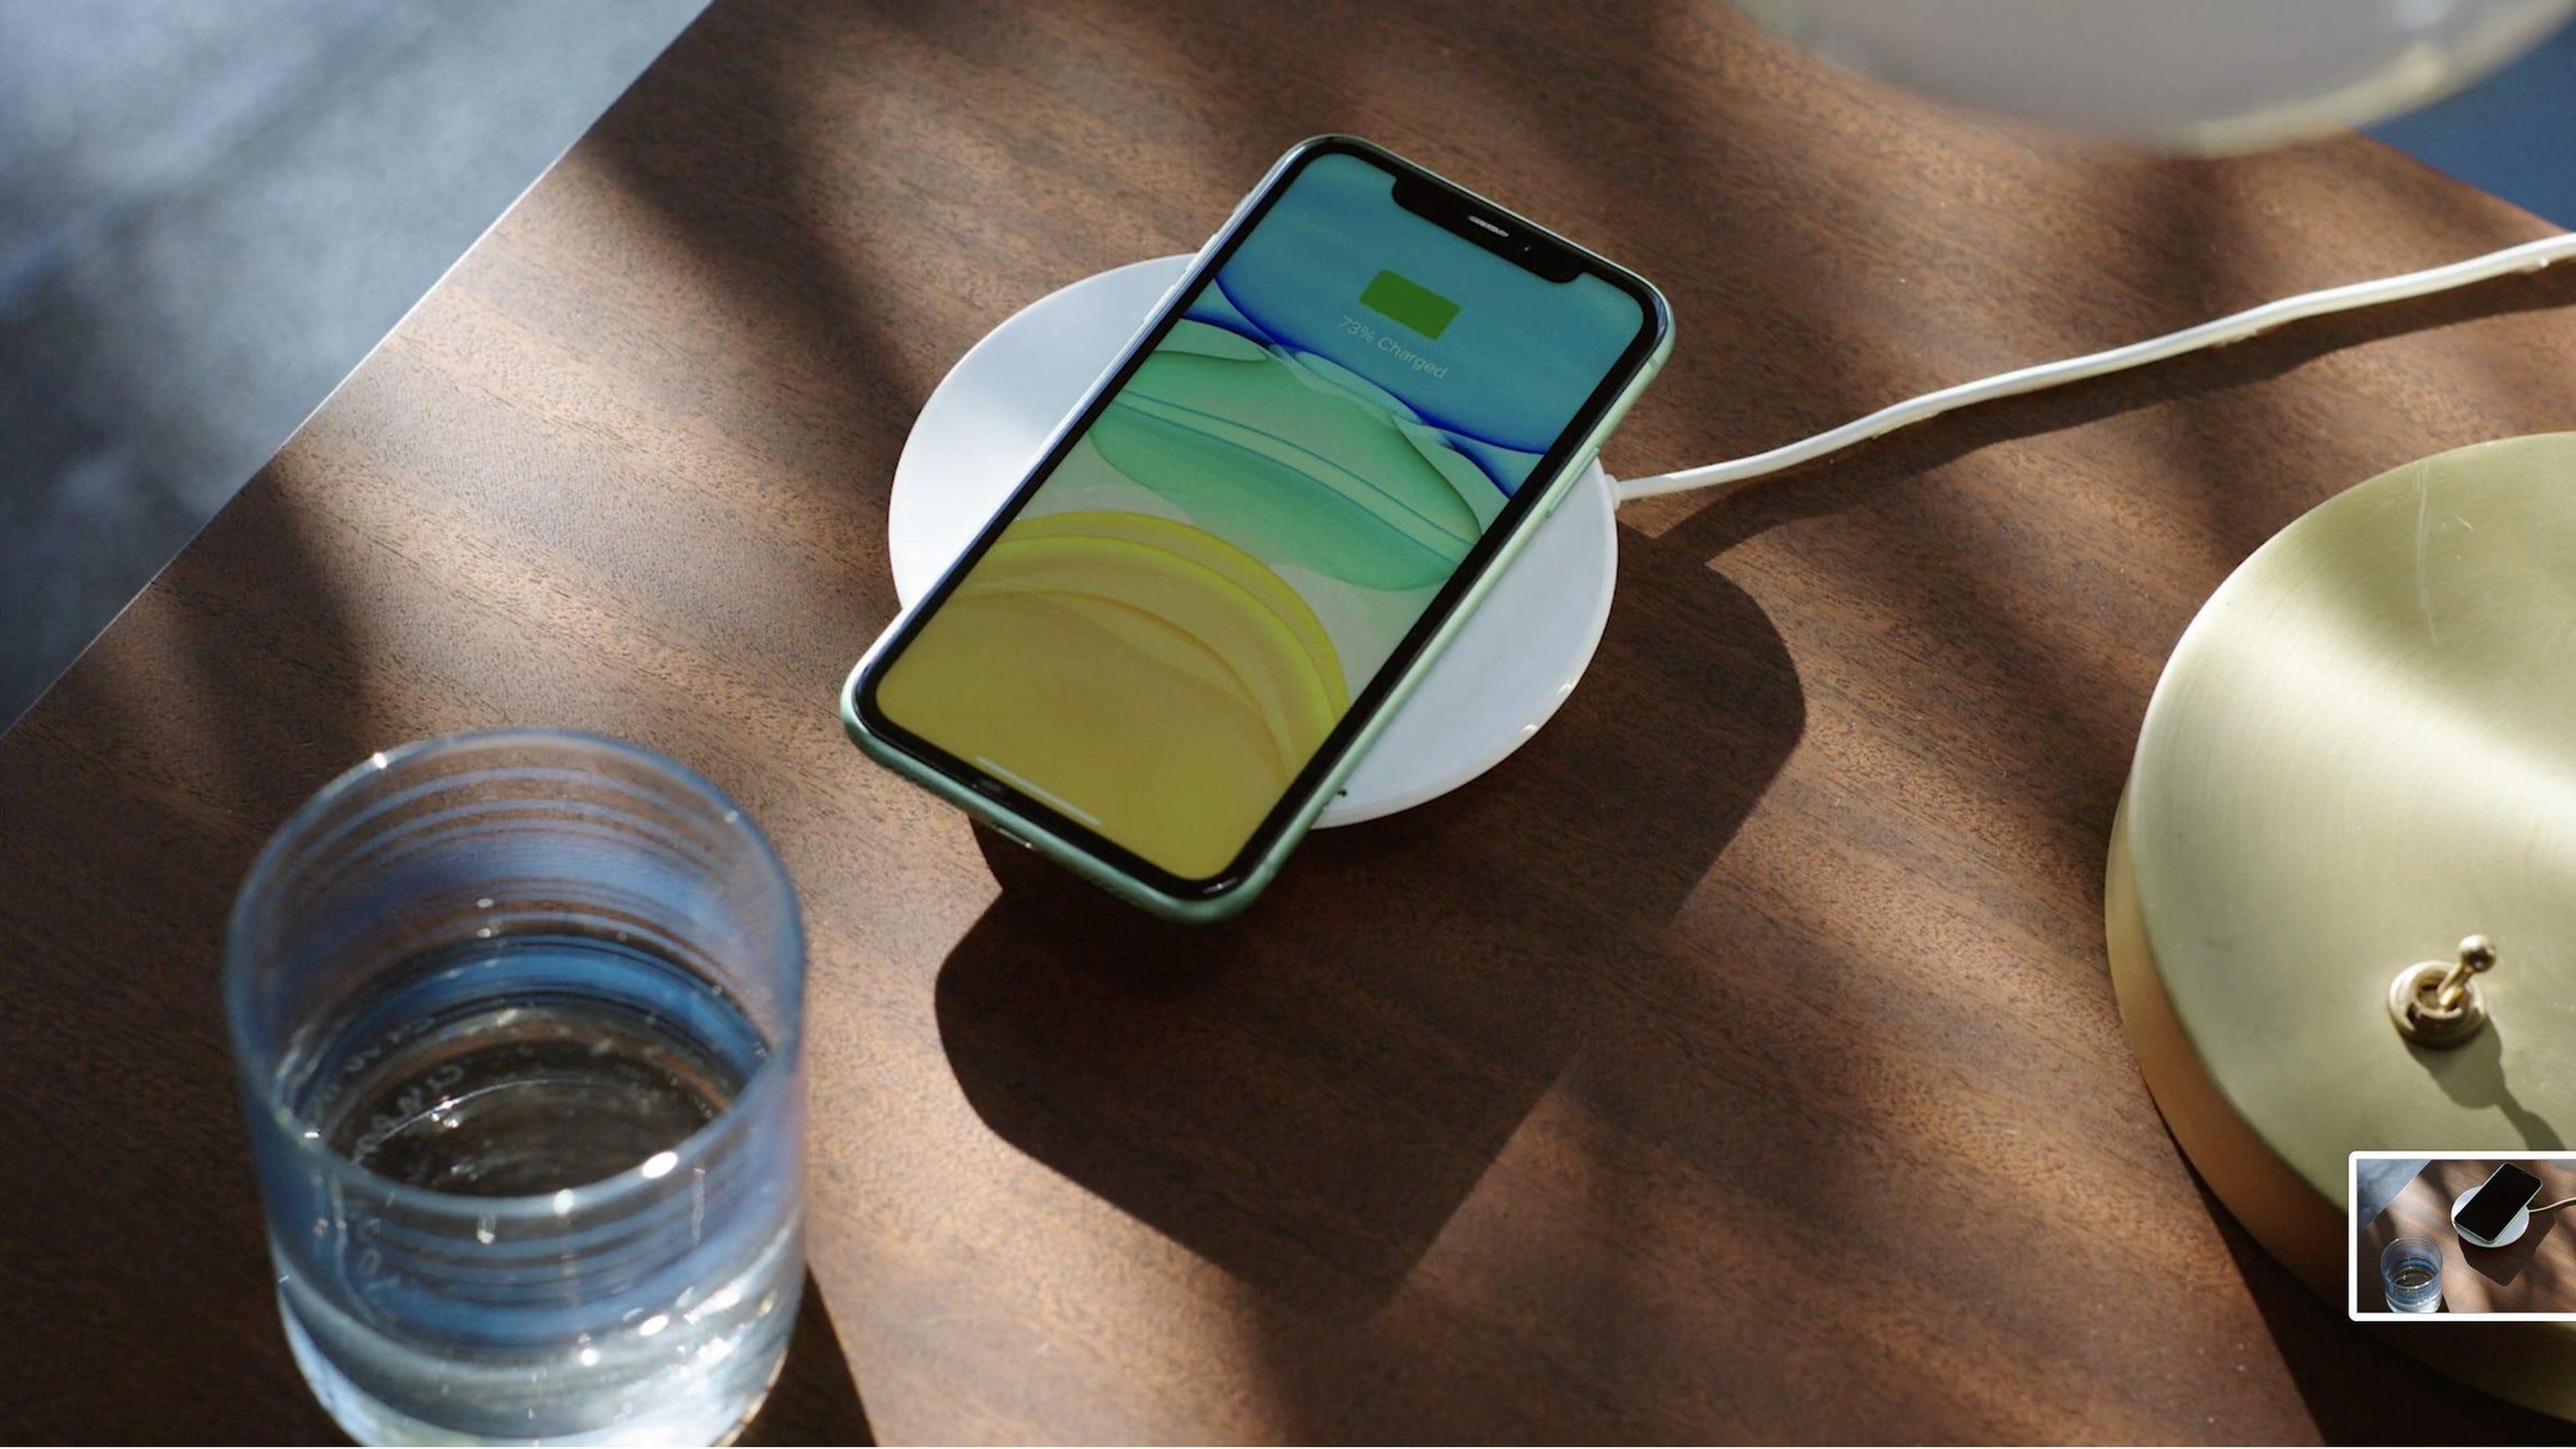 Apple's new wireless charging mat, the MagSafe charger.